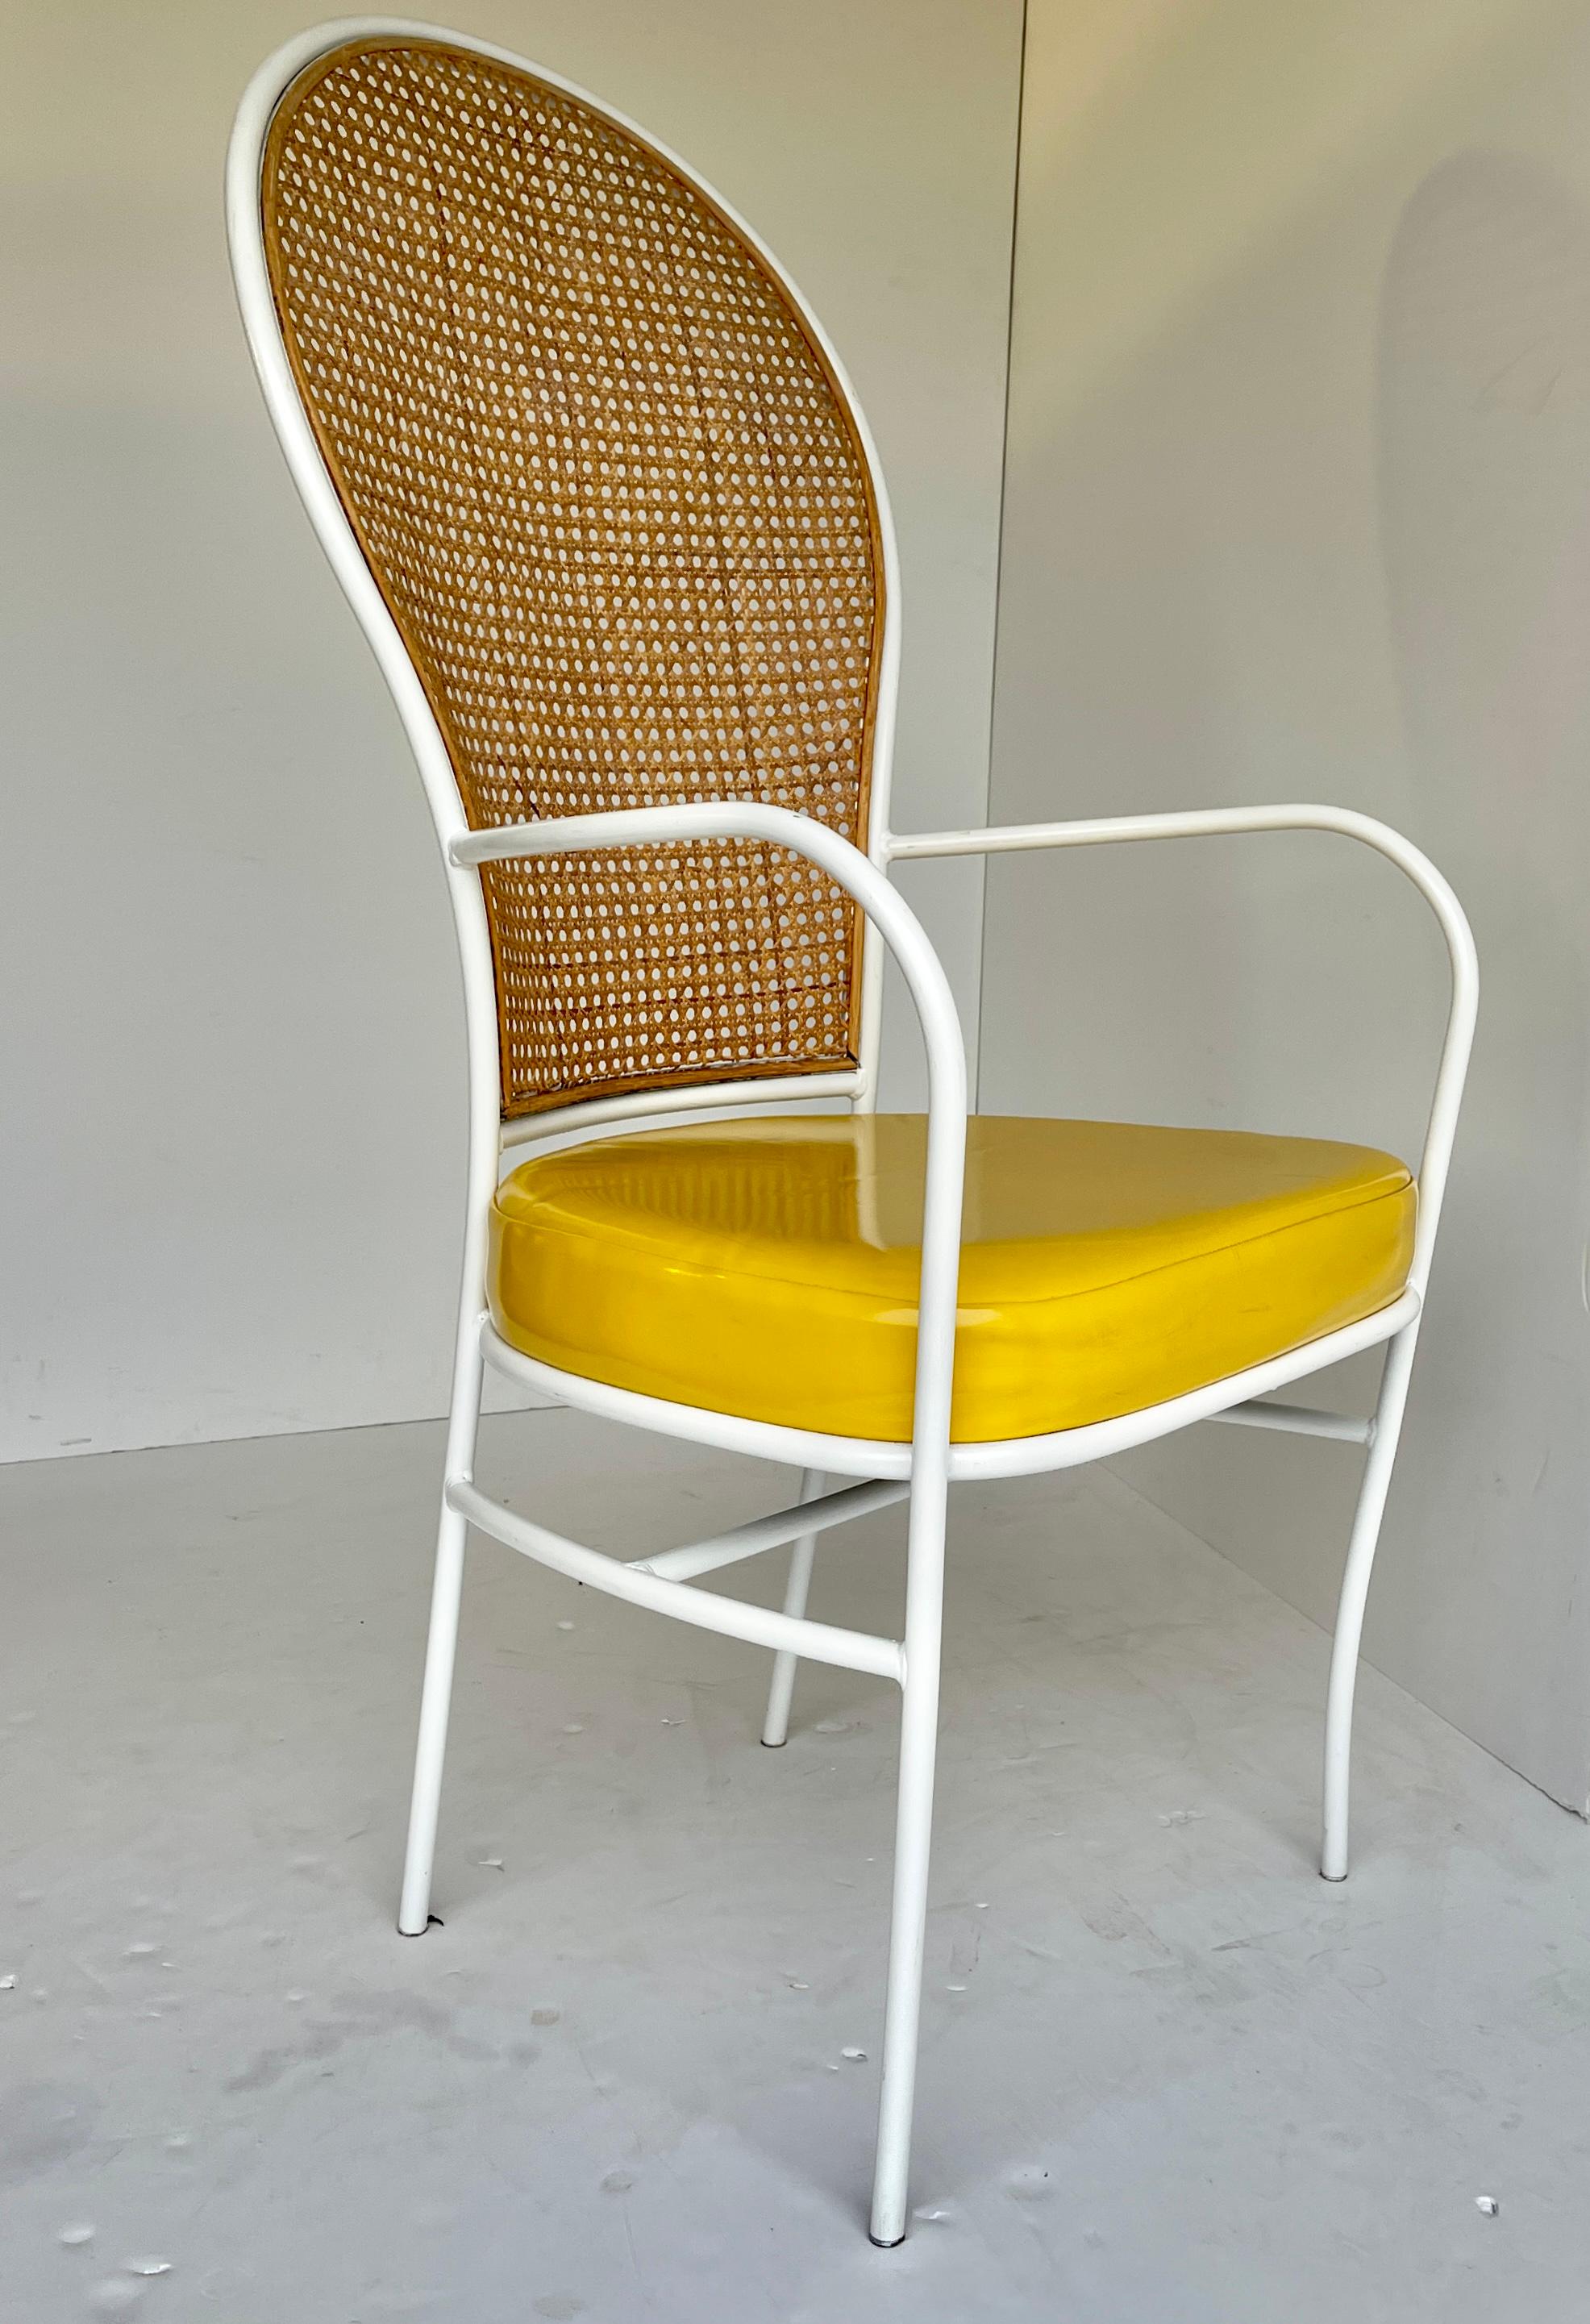 Fabulous and rather rare Milo Baughman for Thayer Coggin Dated 1976. Wrought iron white metal with cane back. Upholstered seat in original bright yellow vinyl. Original makers label and date on bottom. Chair is in original condition. Caning on chair